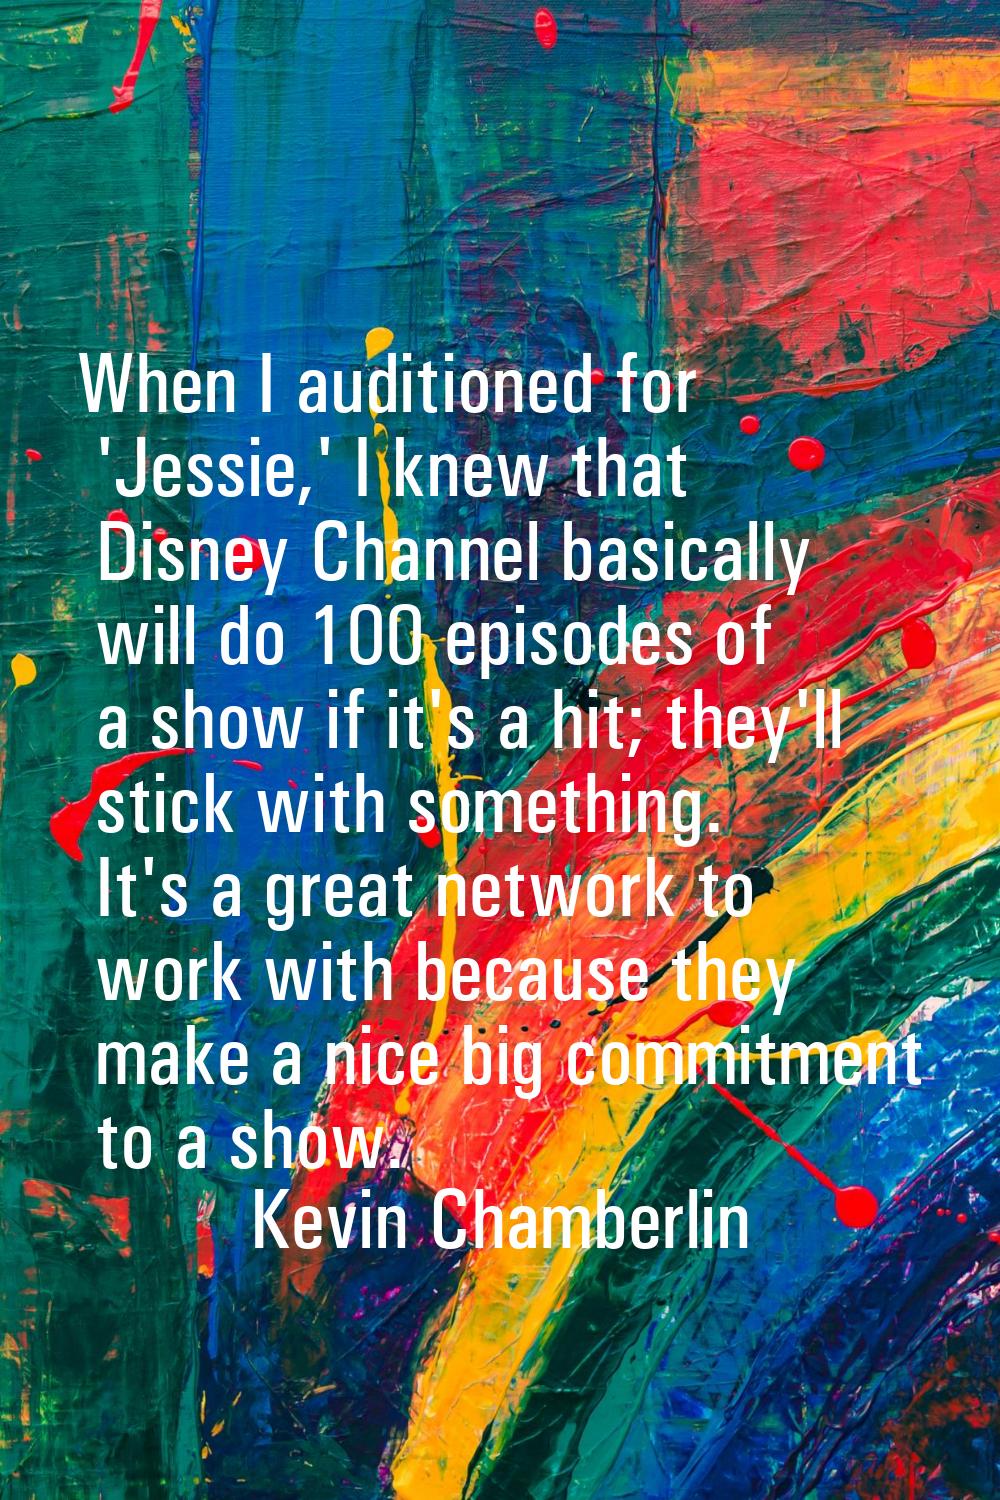 When I auditioned for 'Jessie,' I knew that Disney Channel basically will do 100 episodes of a show